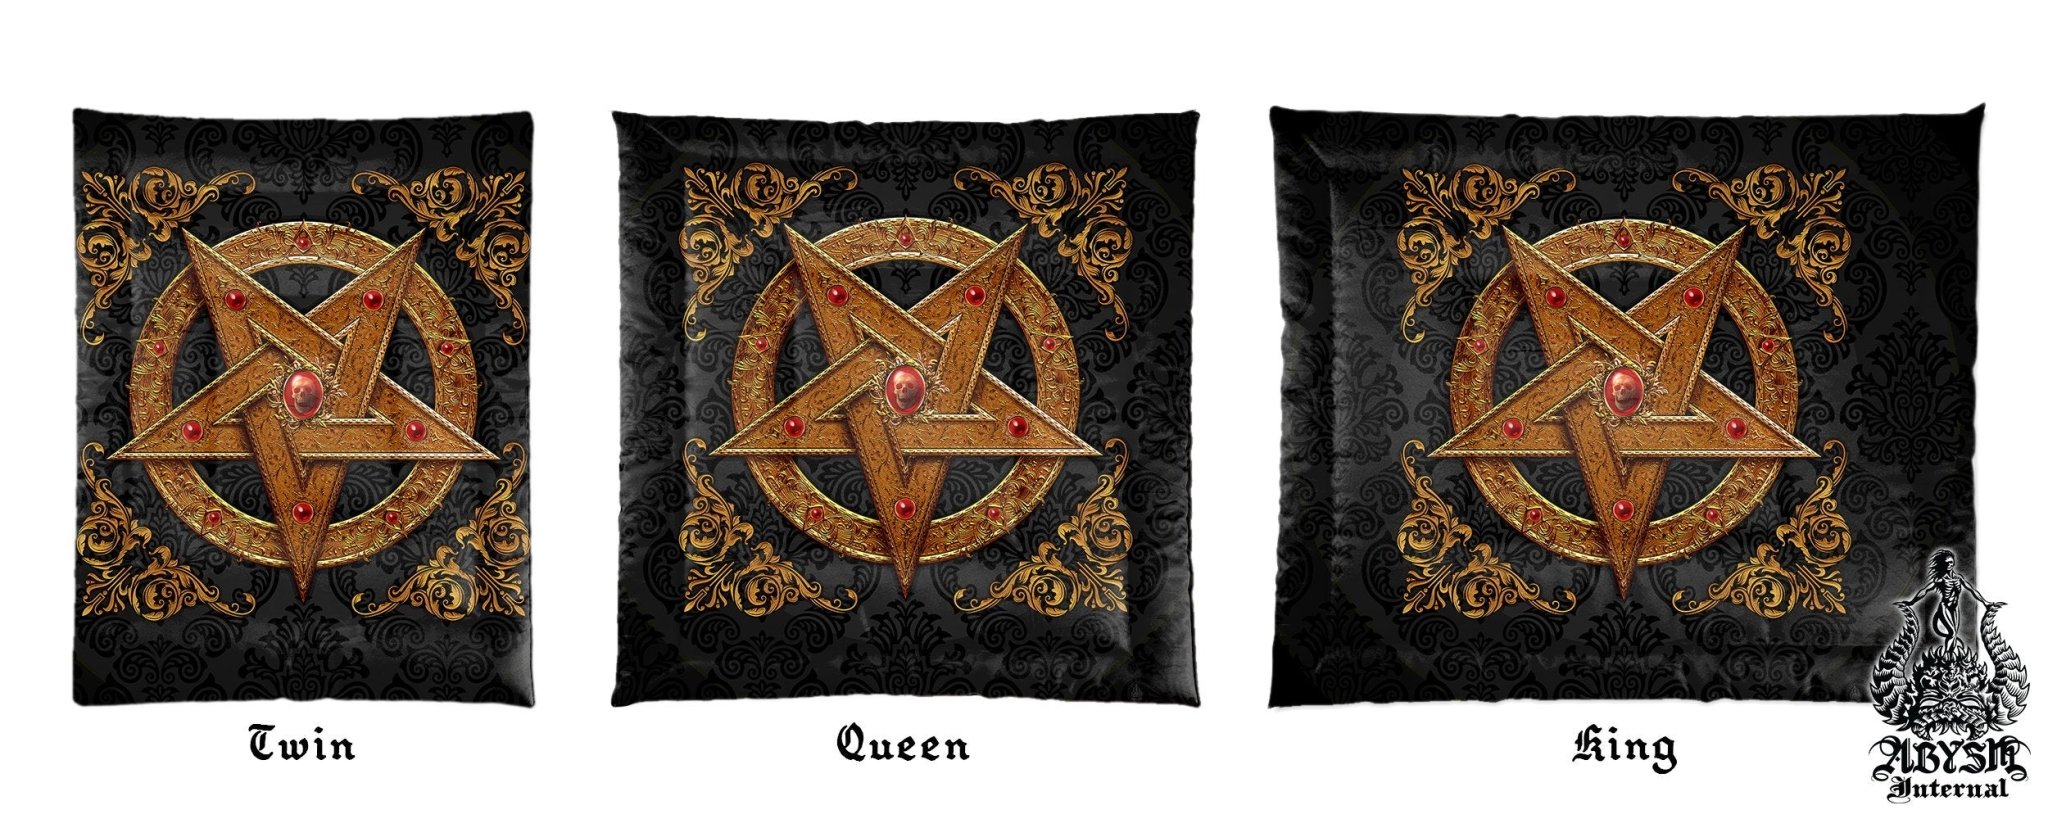 Pentagram Bedding Set, Comforter and Duvet, Satanic Goth Bed Cover and Bedroom Decor, King, Queen and Twin Size - Gold - Abysm Internal